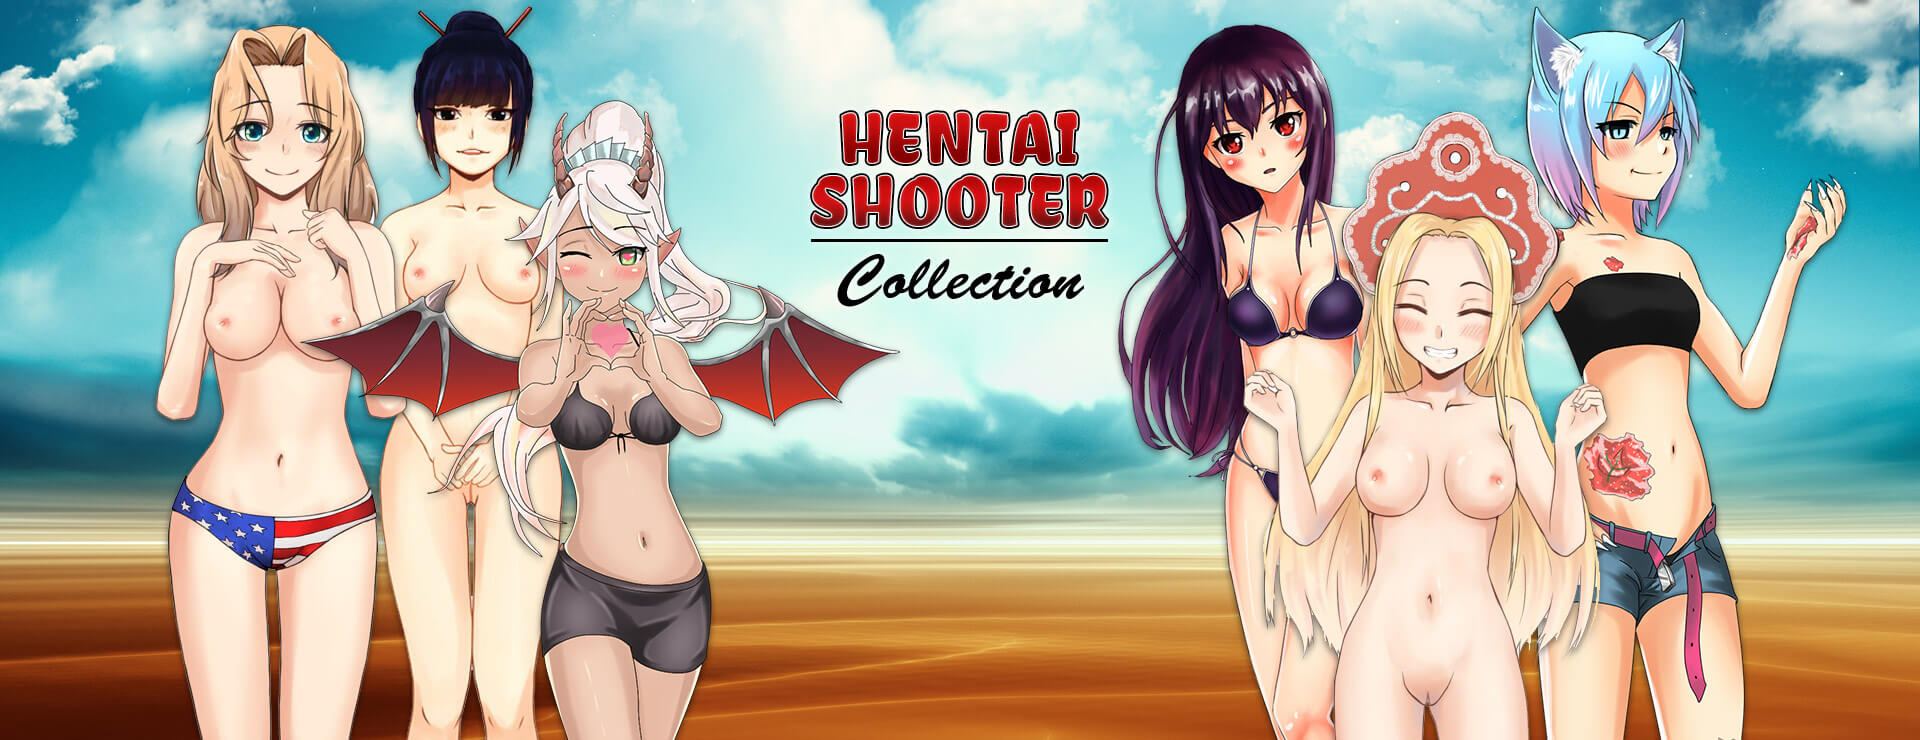 Hentai Shooter 3D - Complete Collection - Casual Game